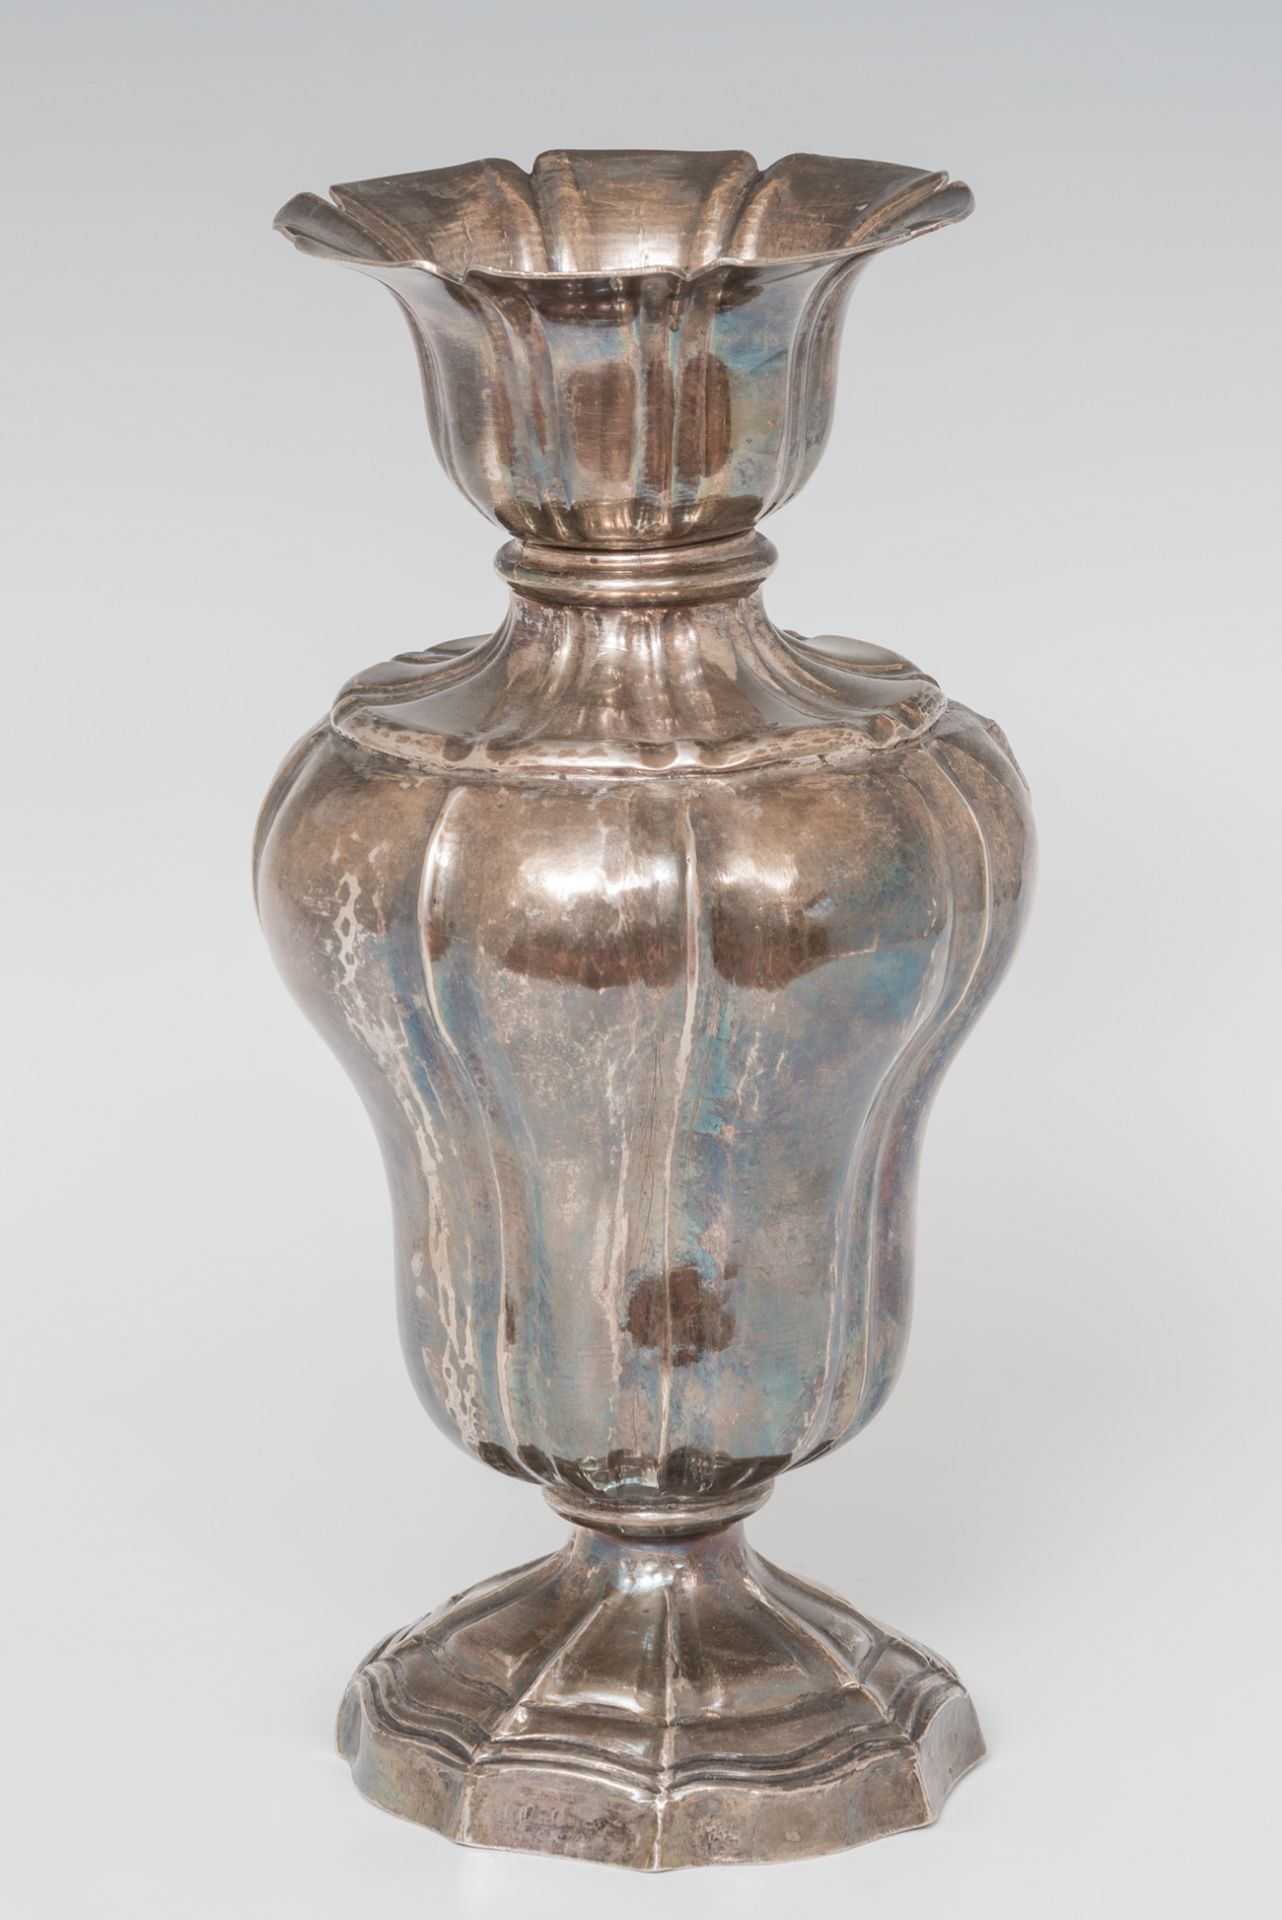 Altar vase in stamped silver. Mexico. 18th centuryWeight: 959.1 g. Measure: 27.5 x 14 cm.Vase